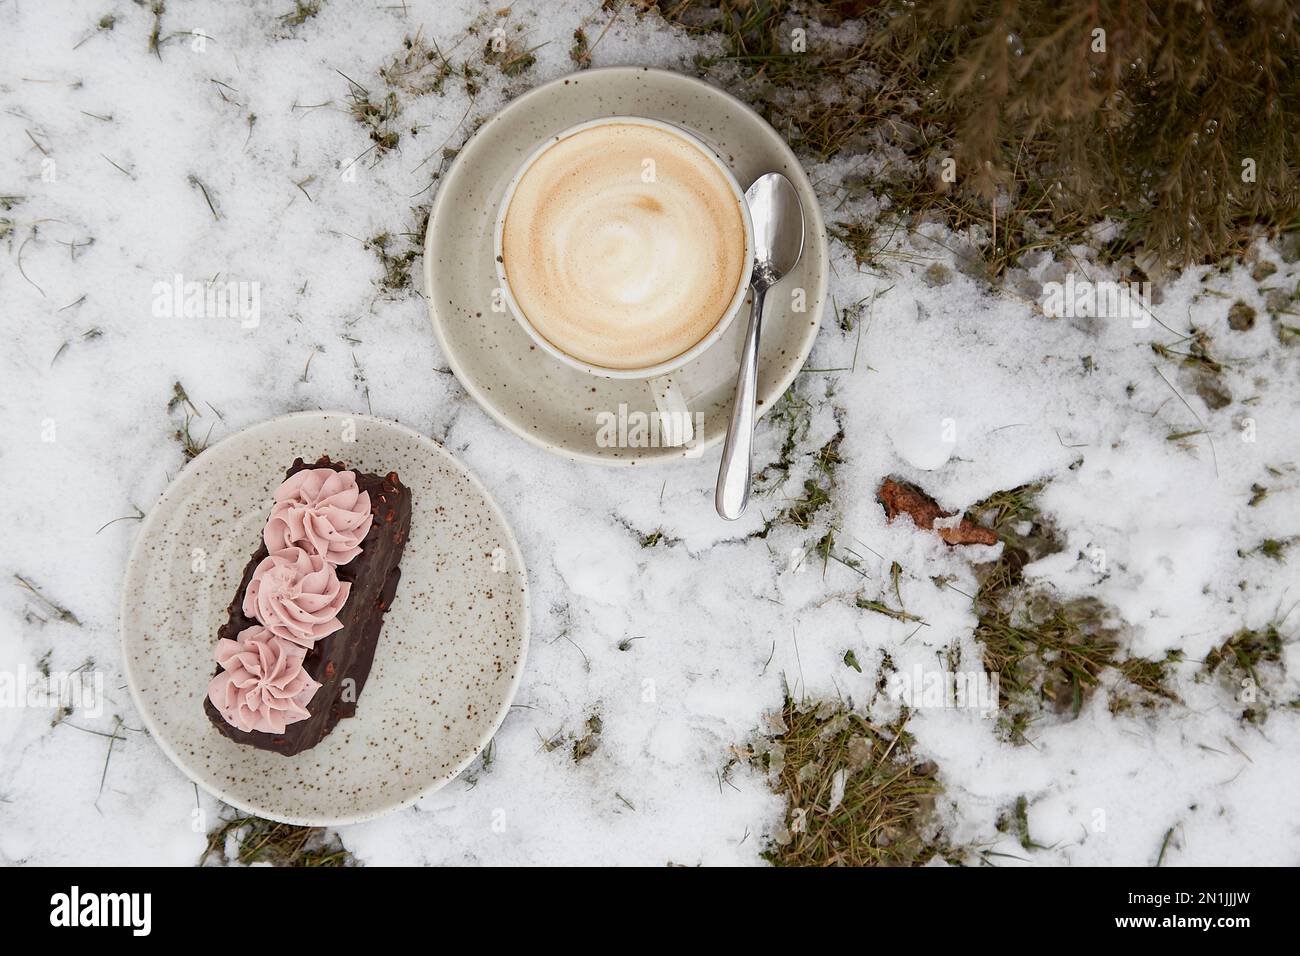 Vegan brownie cake dessert with cup of cappuccino outdoor at the snowy day. Coffee with dessert. Winter aesthetics. Stock Photo